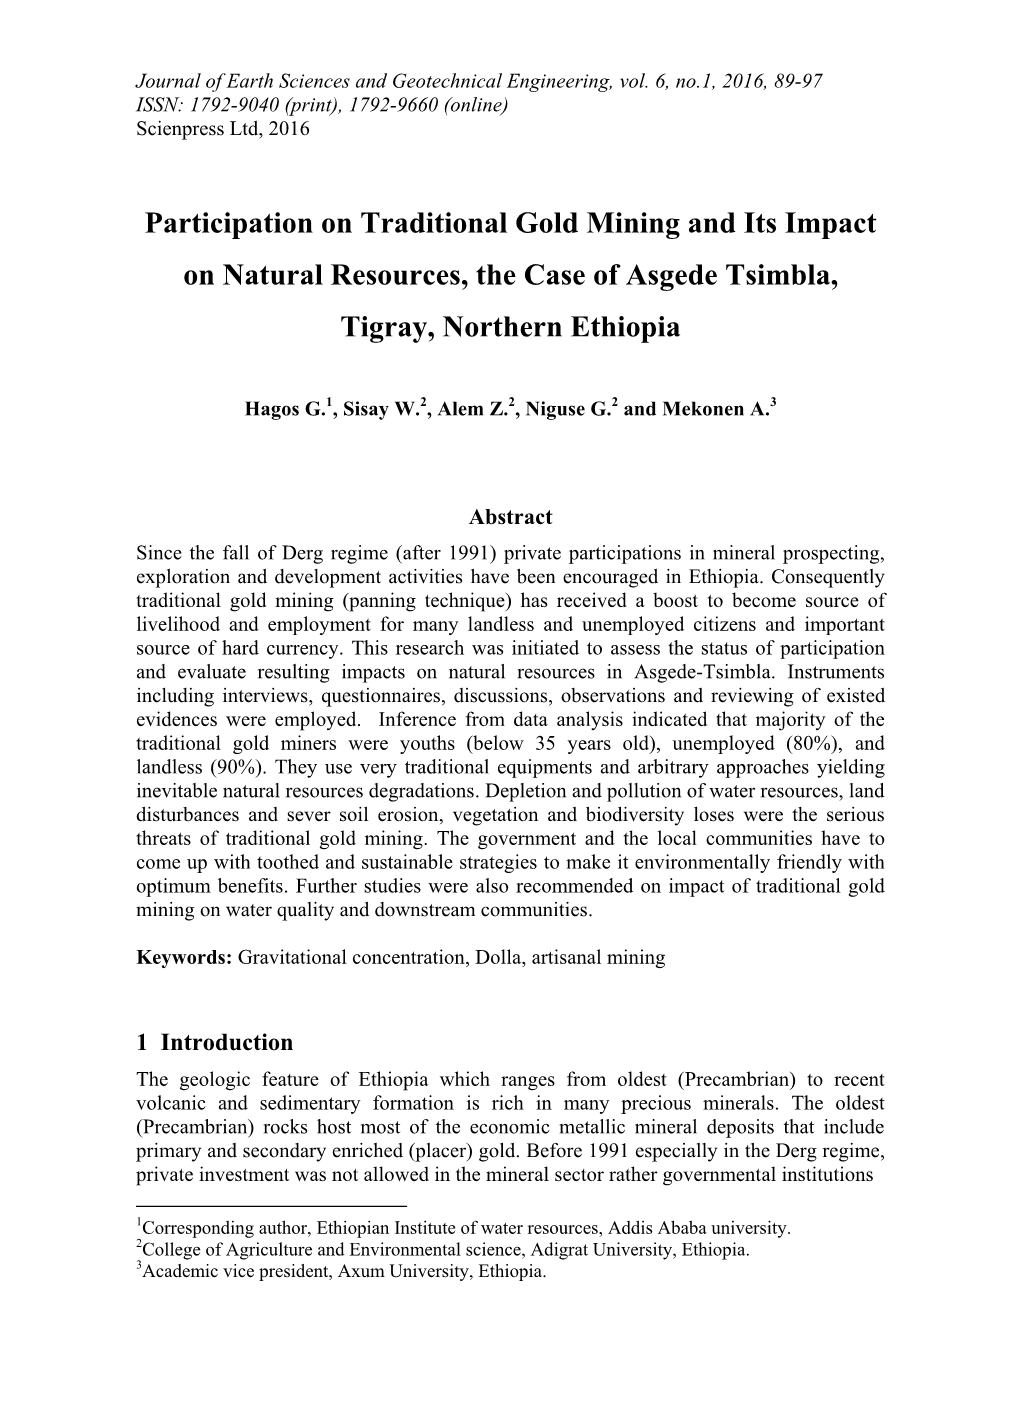 Participation on Traditional Gold Mining and Its Impact on Natural Resources, the Case of Asgede Tsimbla, Tigray, Northern Ethiopia